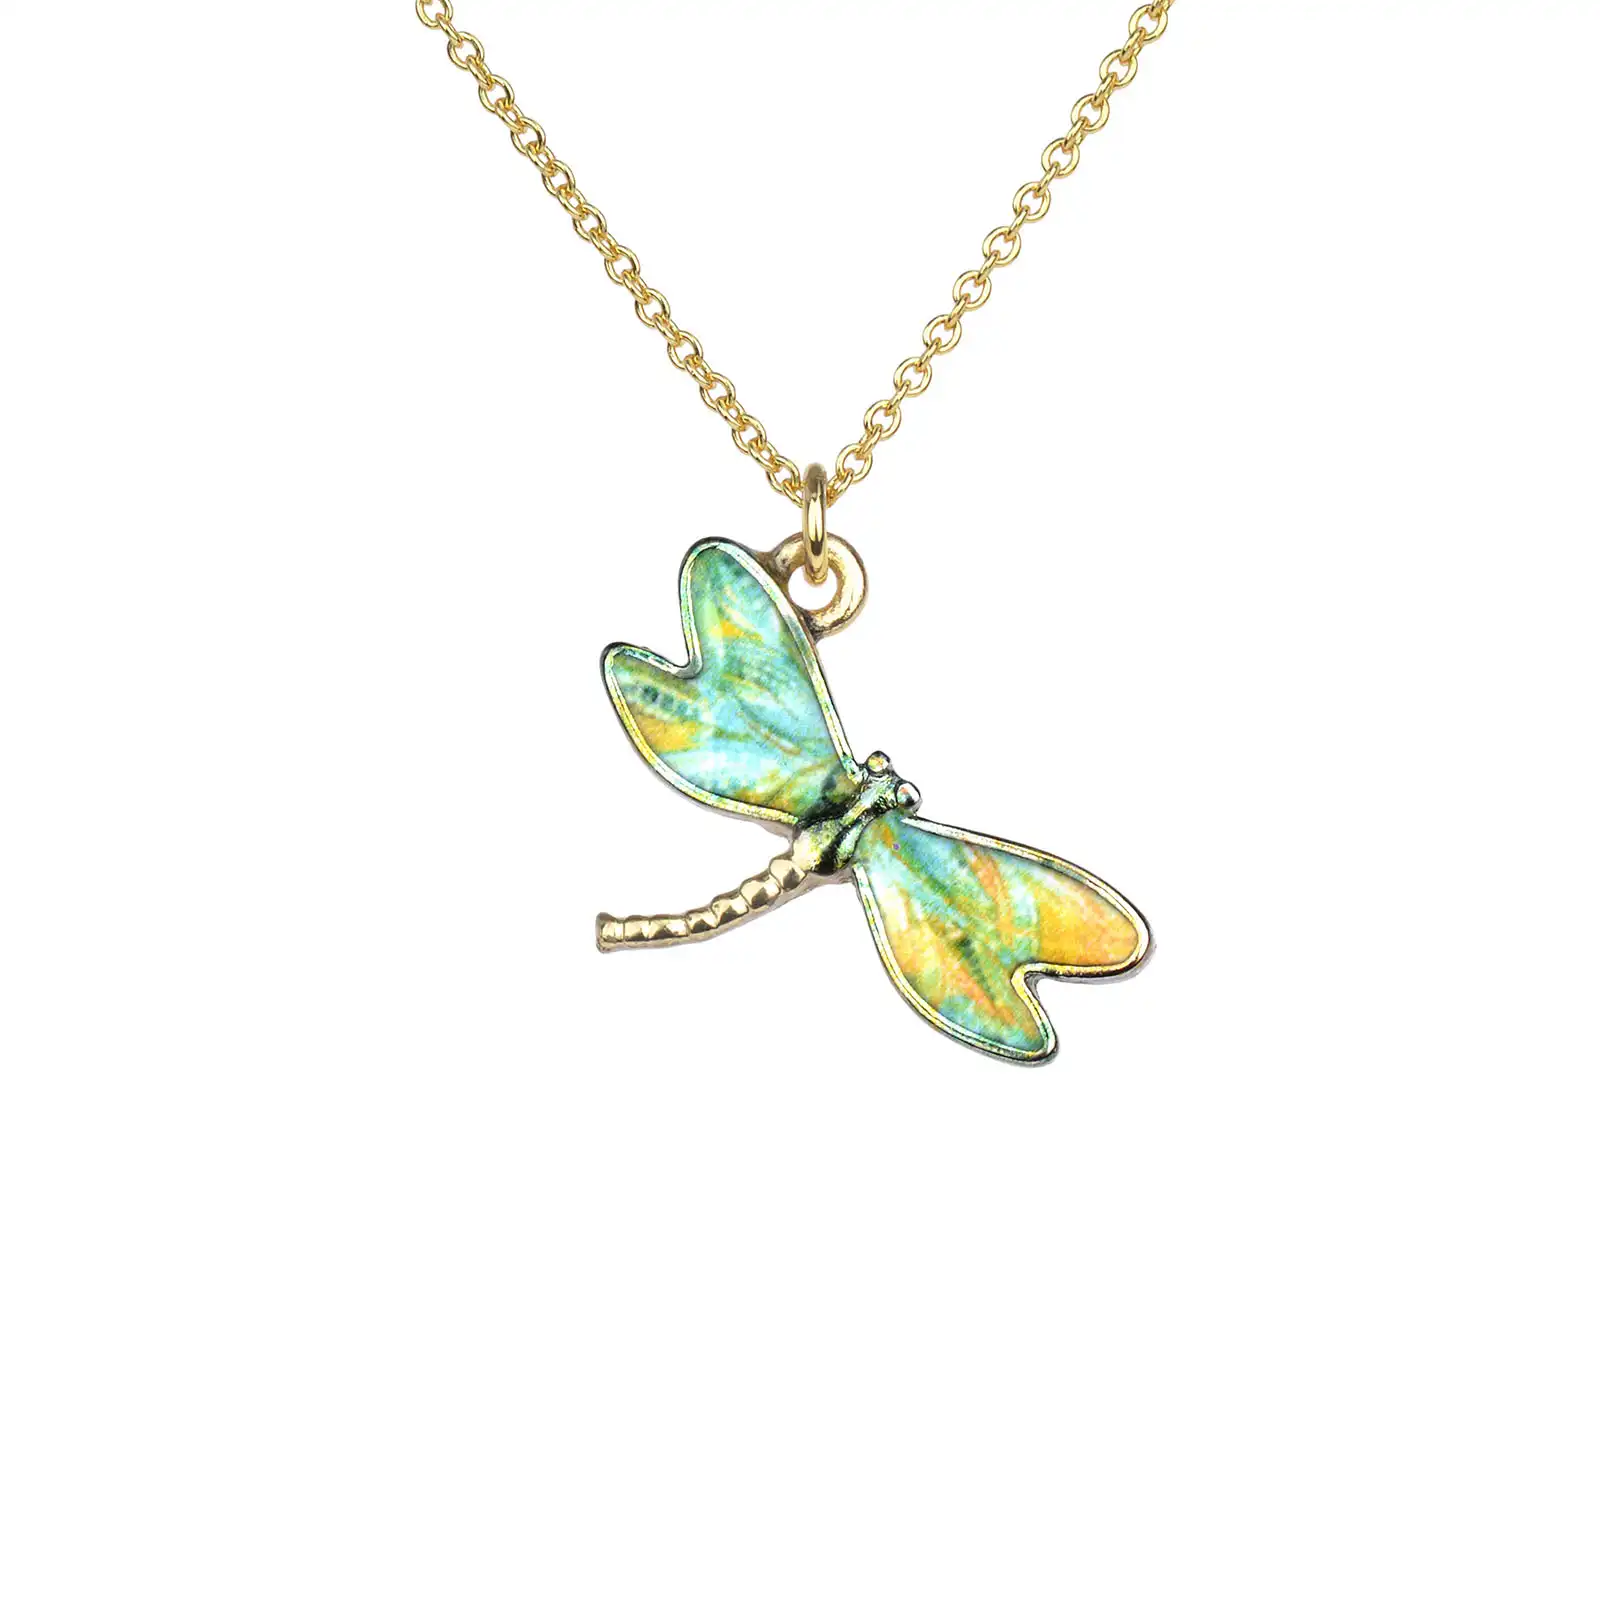 Customized Gold Plated Green Dragonfly Charm Jewelry Pendant Necklace for Girlfriend Birthday Gift